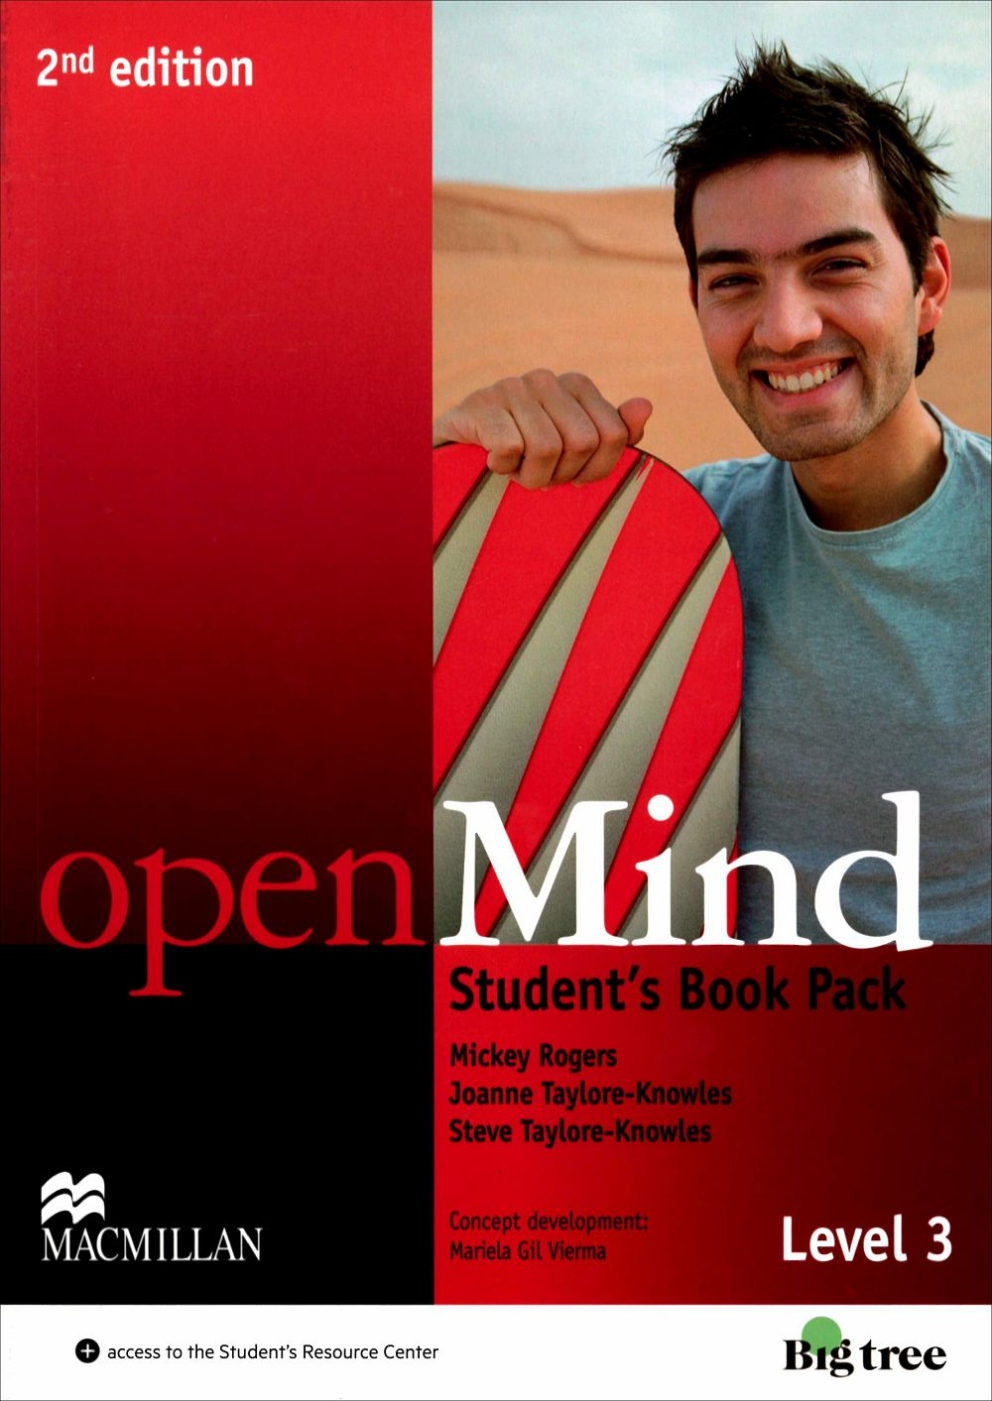 Open Mind 2/e (3) SB with Webcode (Asian Edition)